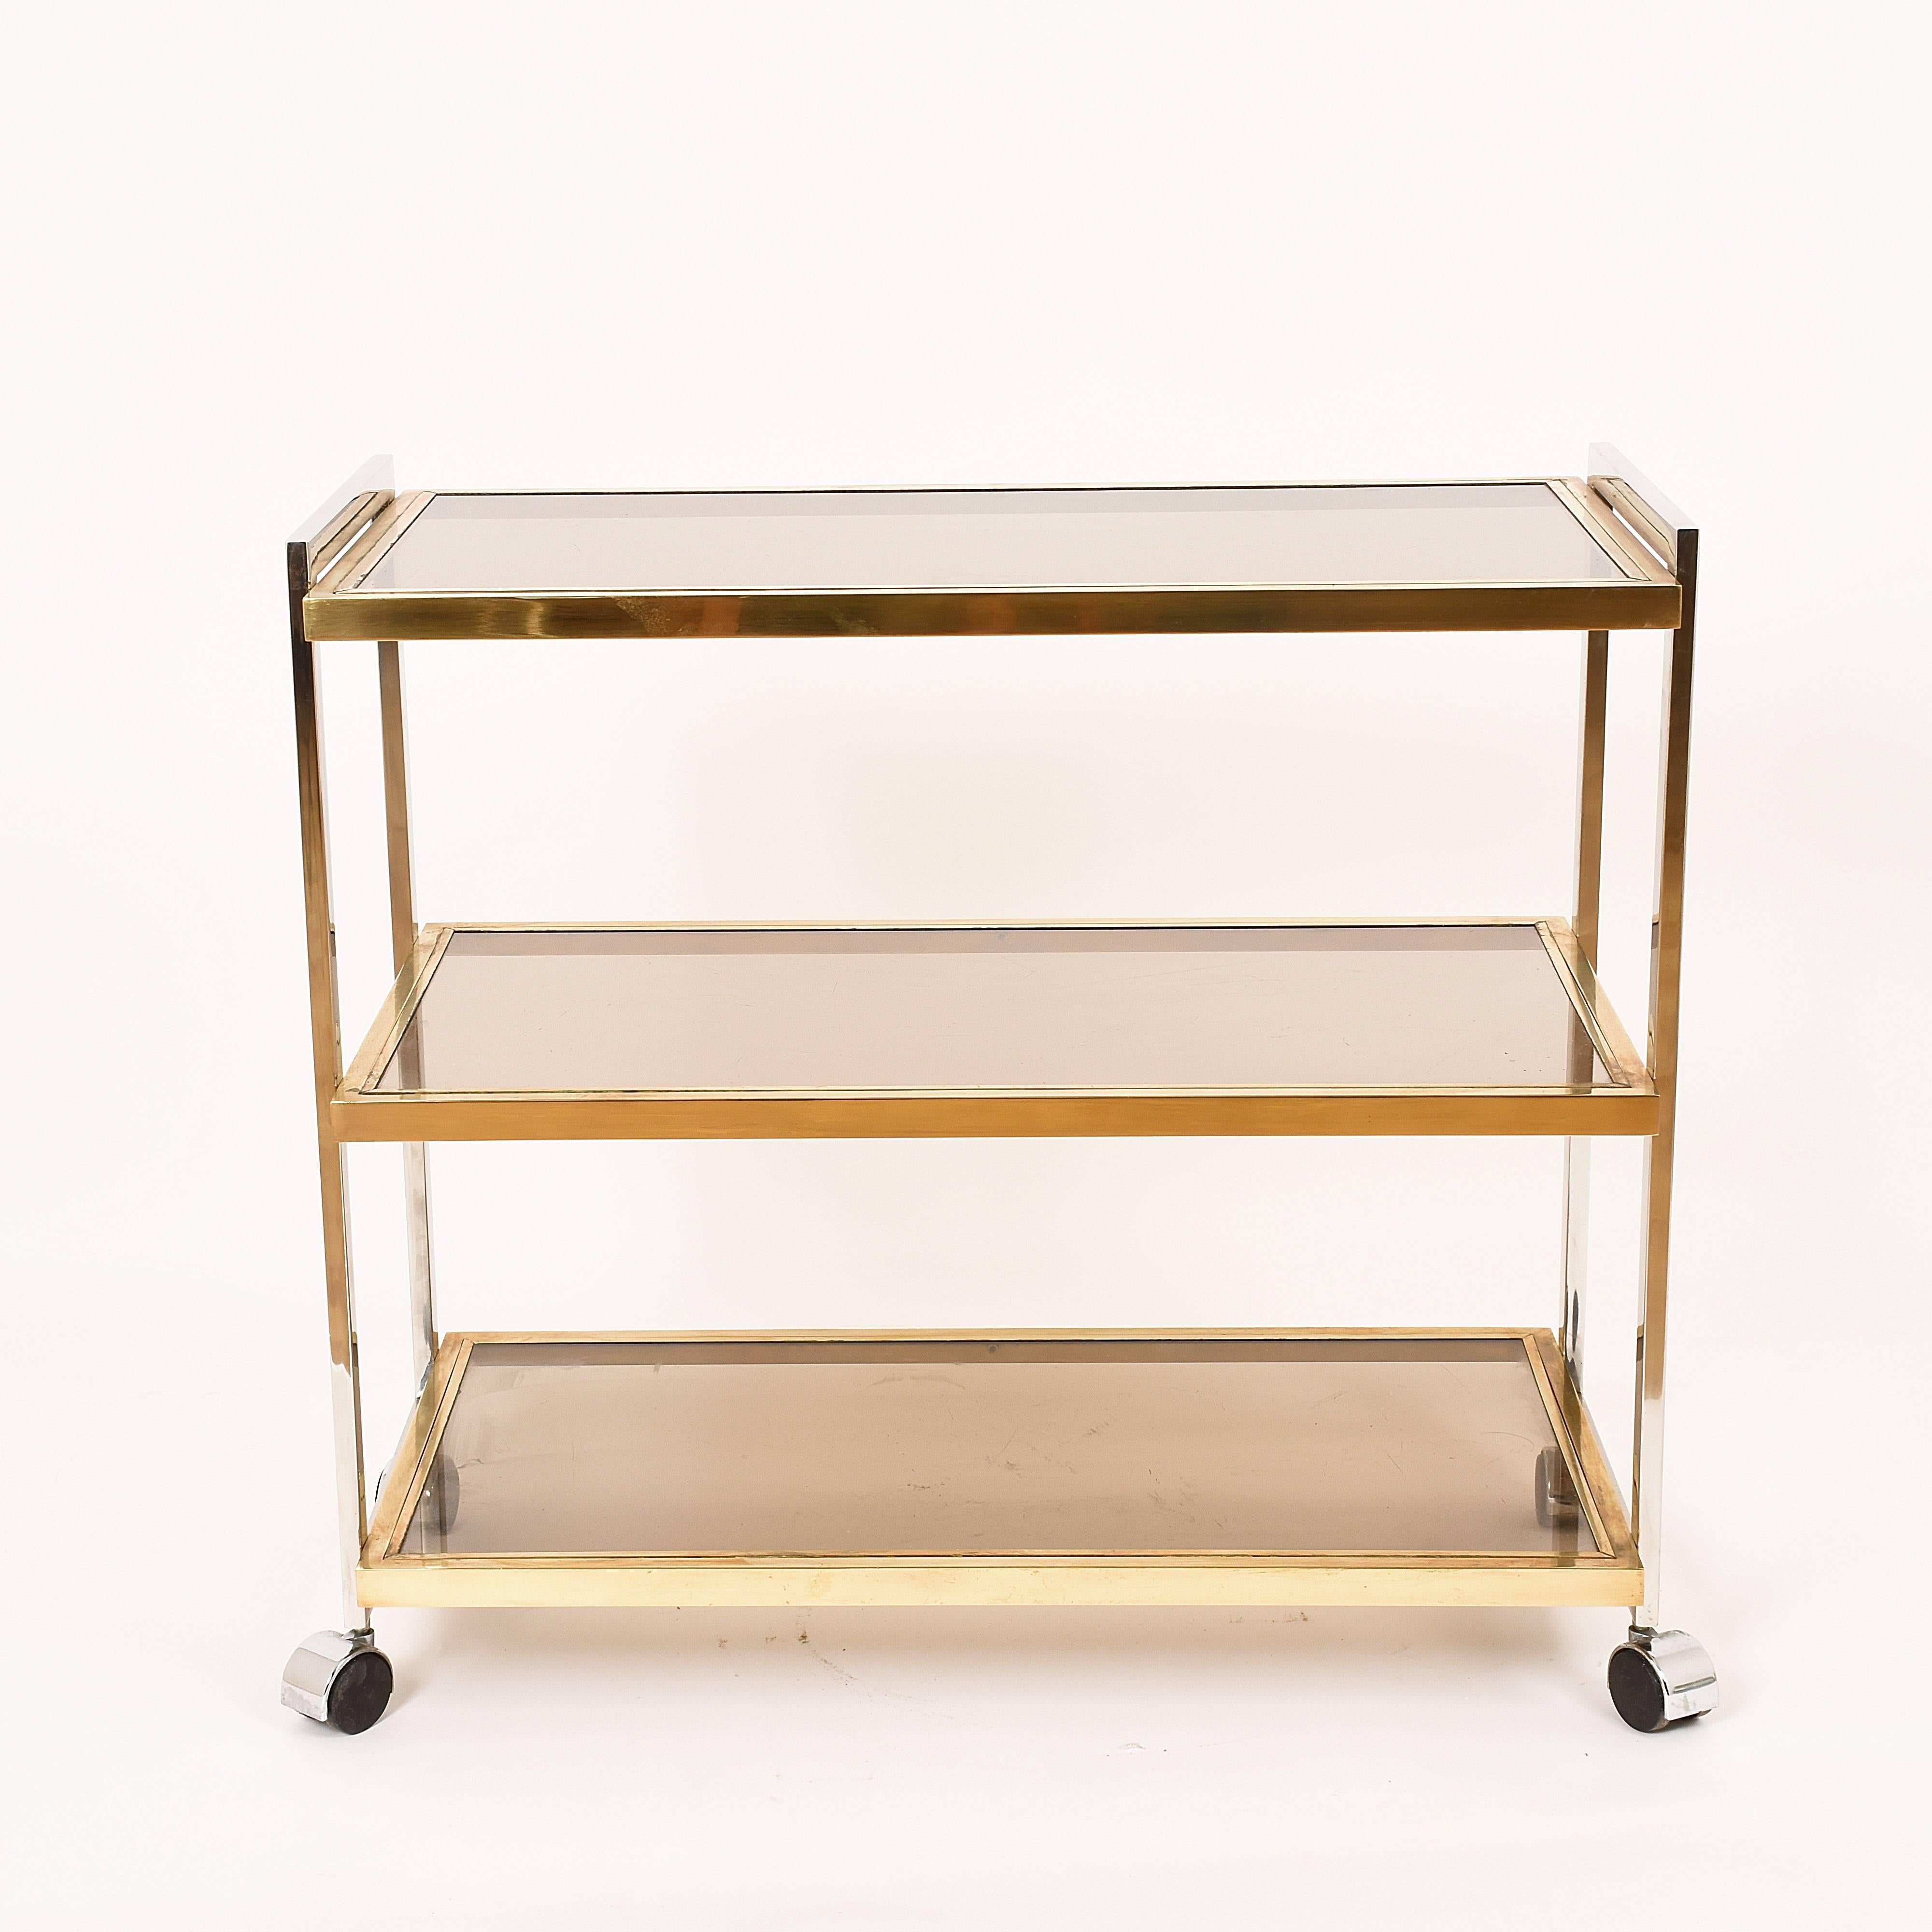 Beautiful trolley bar with a linear design. Made in Italy in the 1970s.
Three glass shelves on chromed and brass structure. Attributable to Romeo Rega.